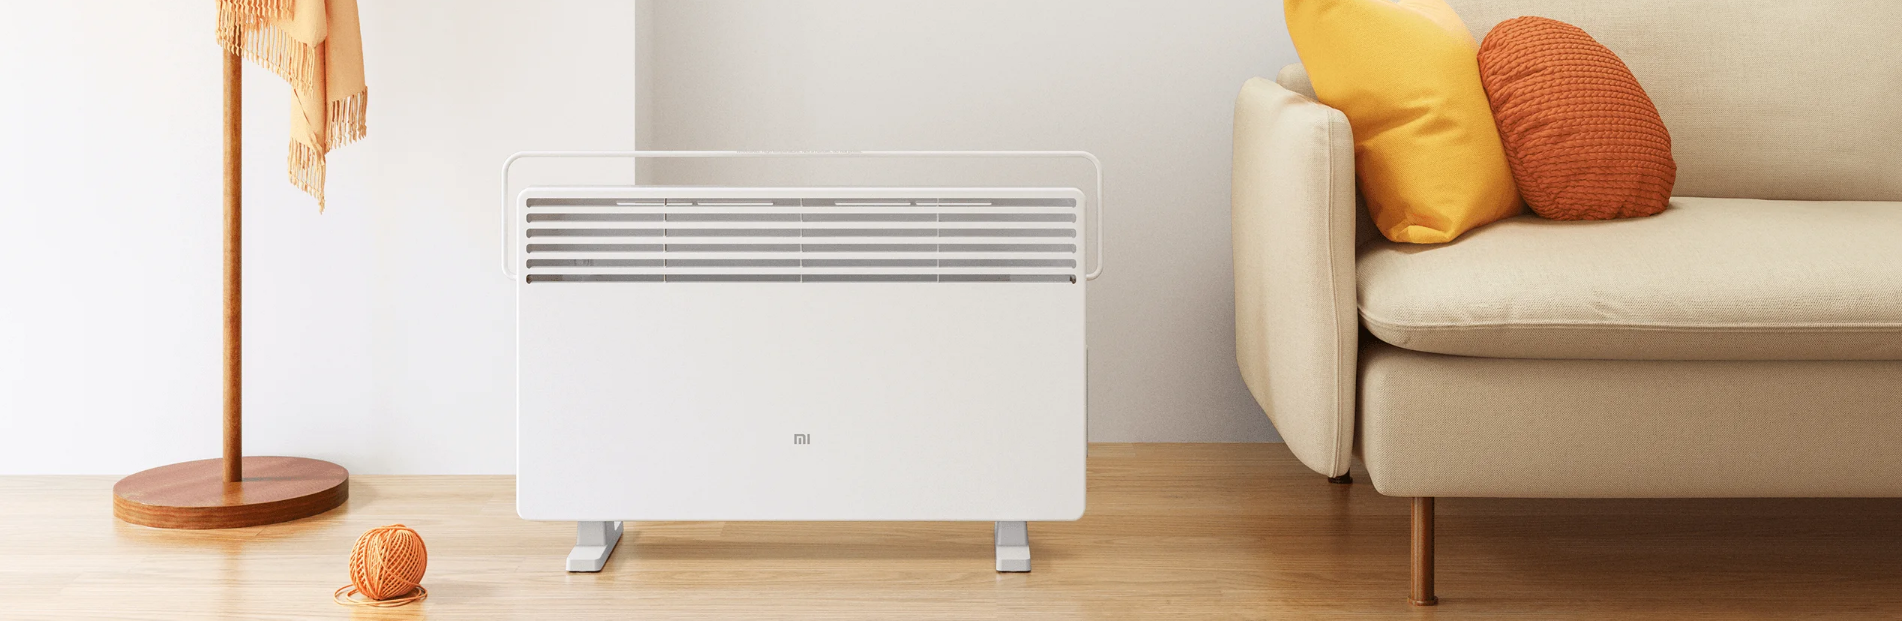 All_new_Xiaomi_Smart_Space_Heater_S_2023_automatically_continue_heating_with_Smart_temperature_control_sold_by_Technomobi